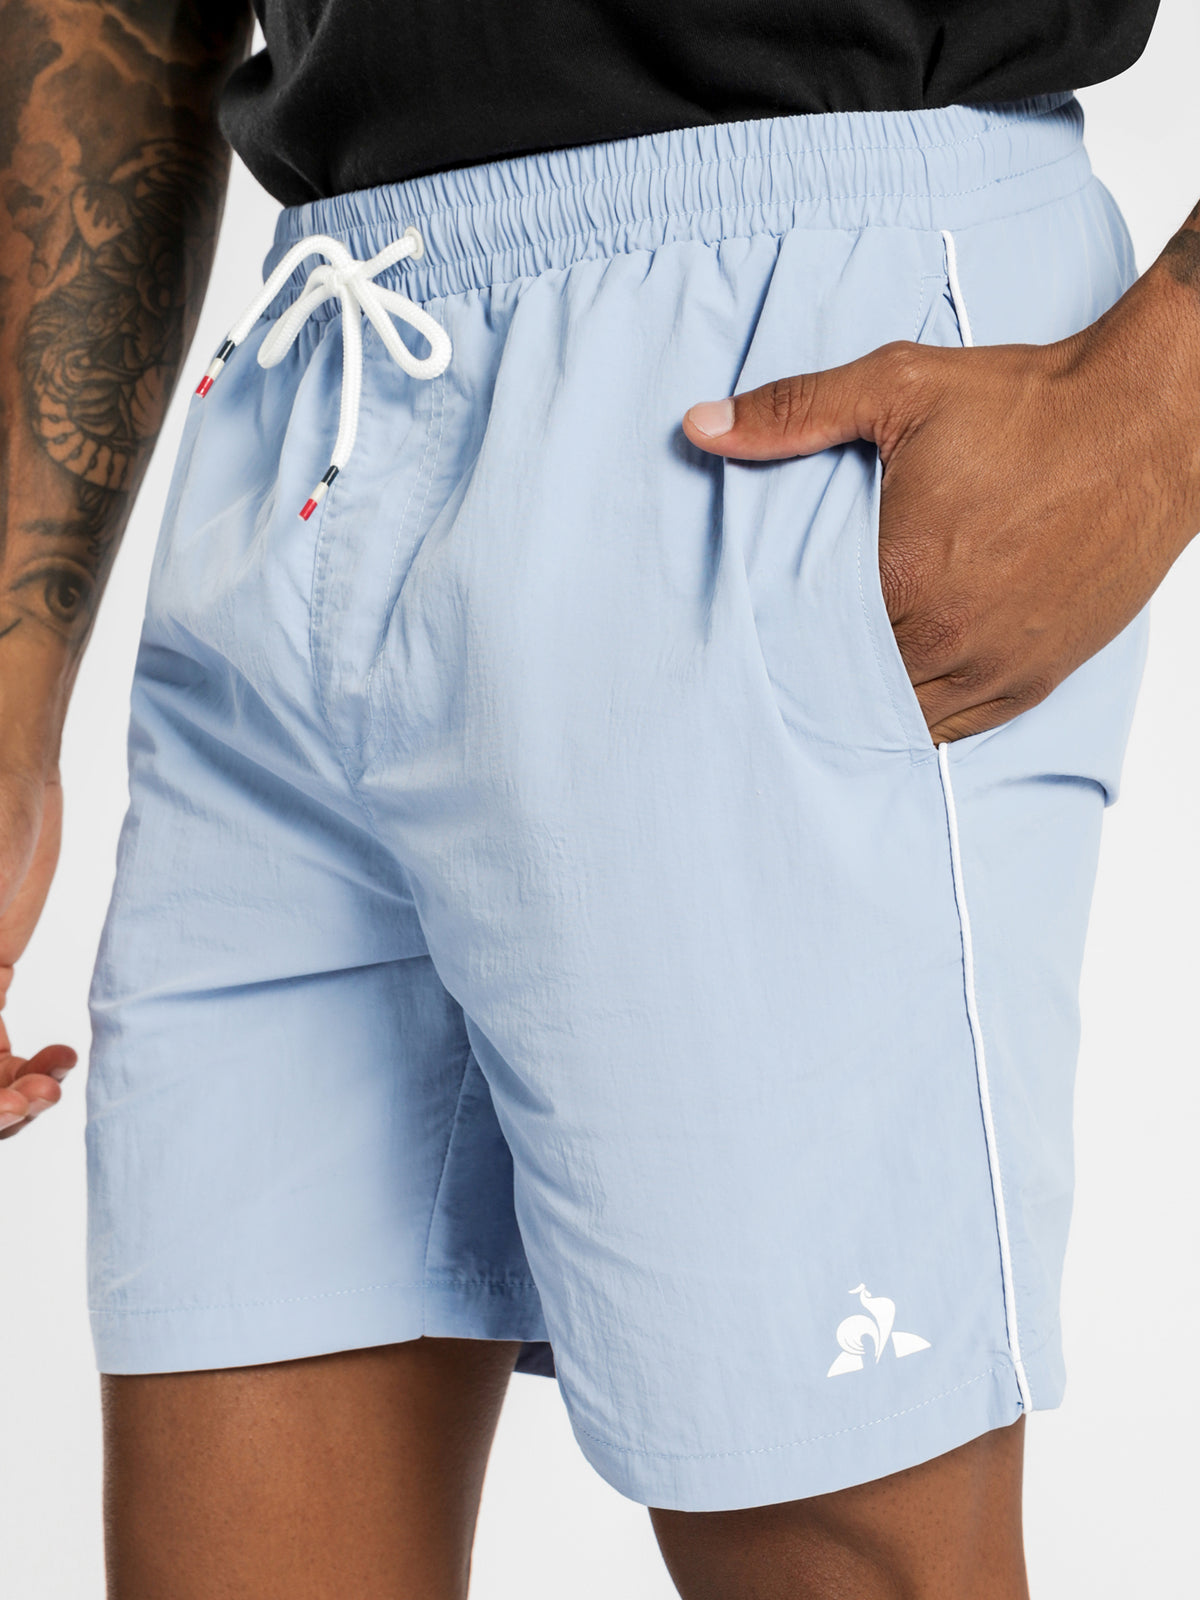 Concurrent Shorts in Light Blue